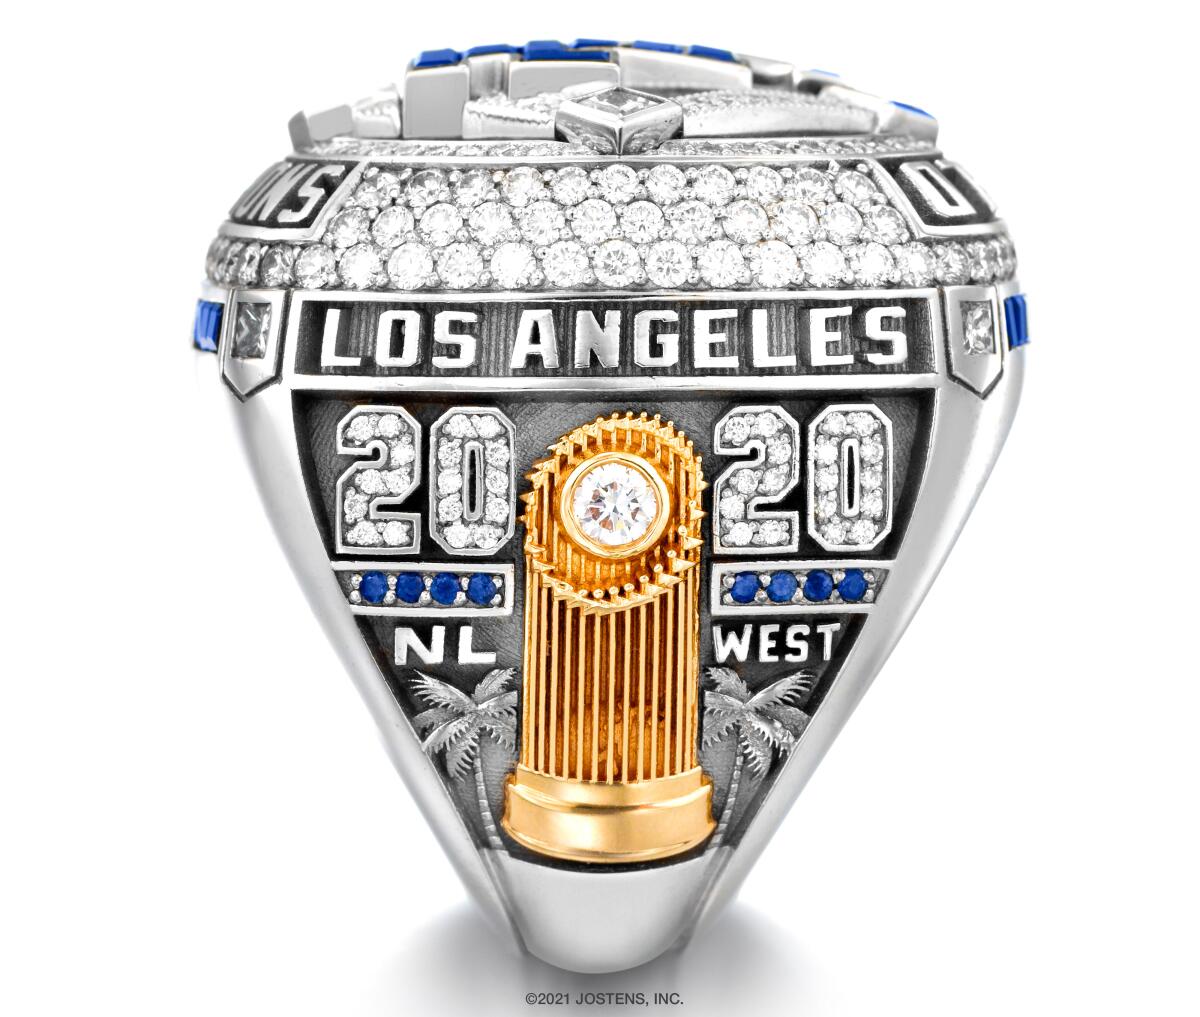 Los Angeles Dodgers- History, Records, Championships, Rings, Owner